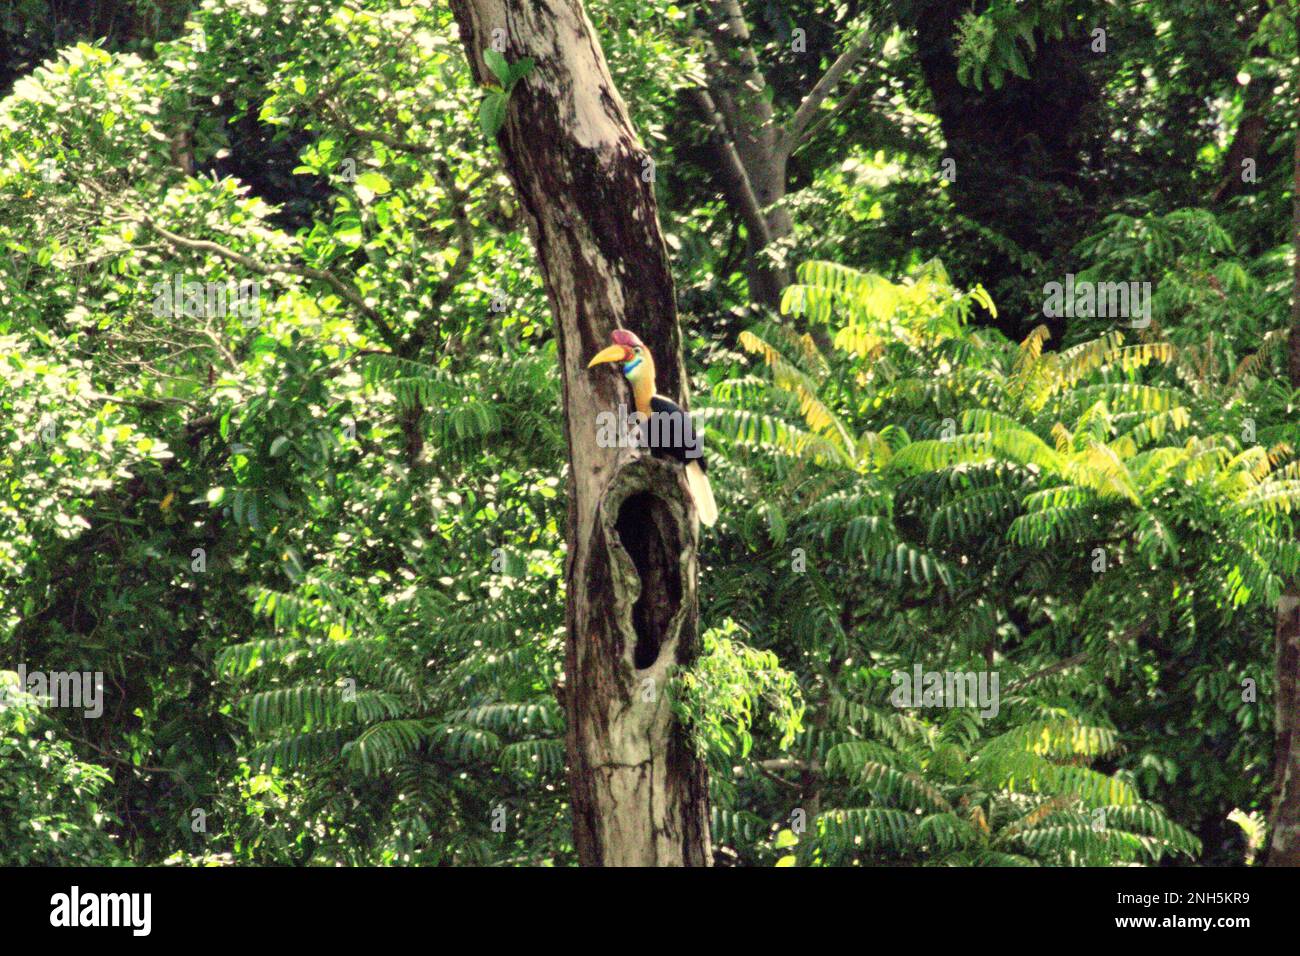 A male individual of knobbed hornbill, or sometimes called Sulawesi wrinkled hornbill (Rhyticeros cassidix), is perching above a potential nesting hole on a tree in rainforest near Mount Tangkoko and DuaSudara in Bitung, North Sulawesi, Indonesia. The species is currently considered vulnerable to extinction due to logging and hunting, according to Amanda Hackett of Wildlife Conservation Society in a 2022 publication. 'With trees diminishing, there are no safe places for hornbill pairs to build their nests in large mature trees,' she added. Stock Photo